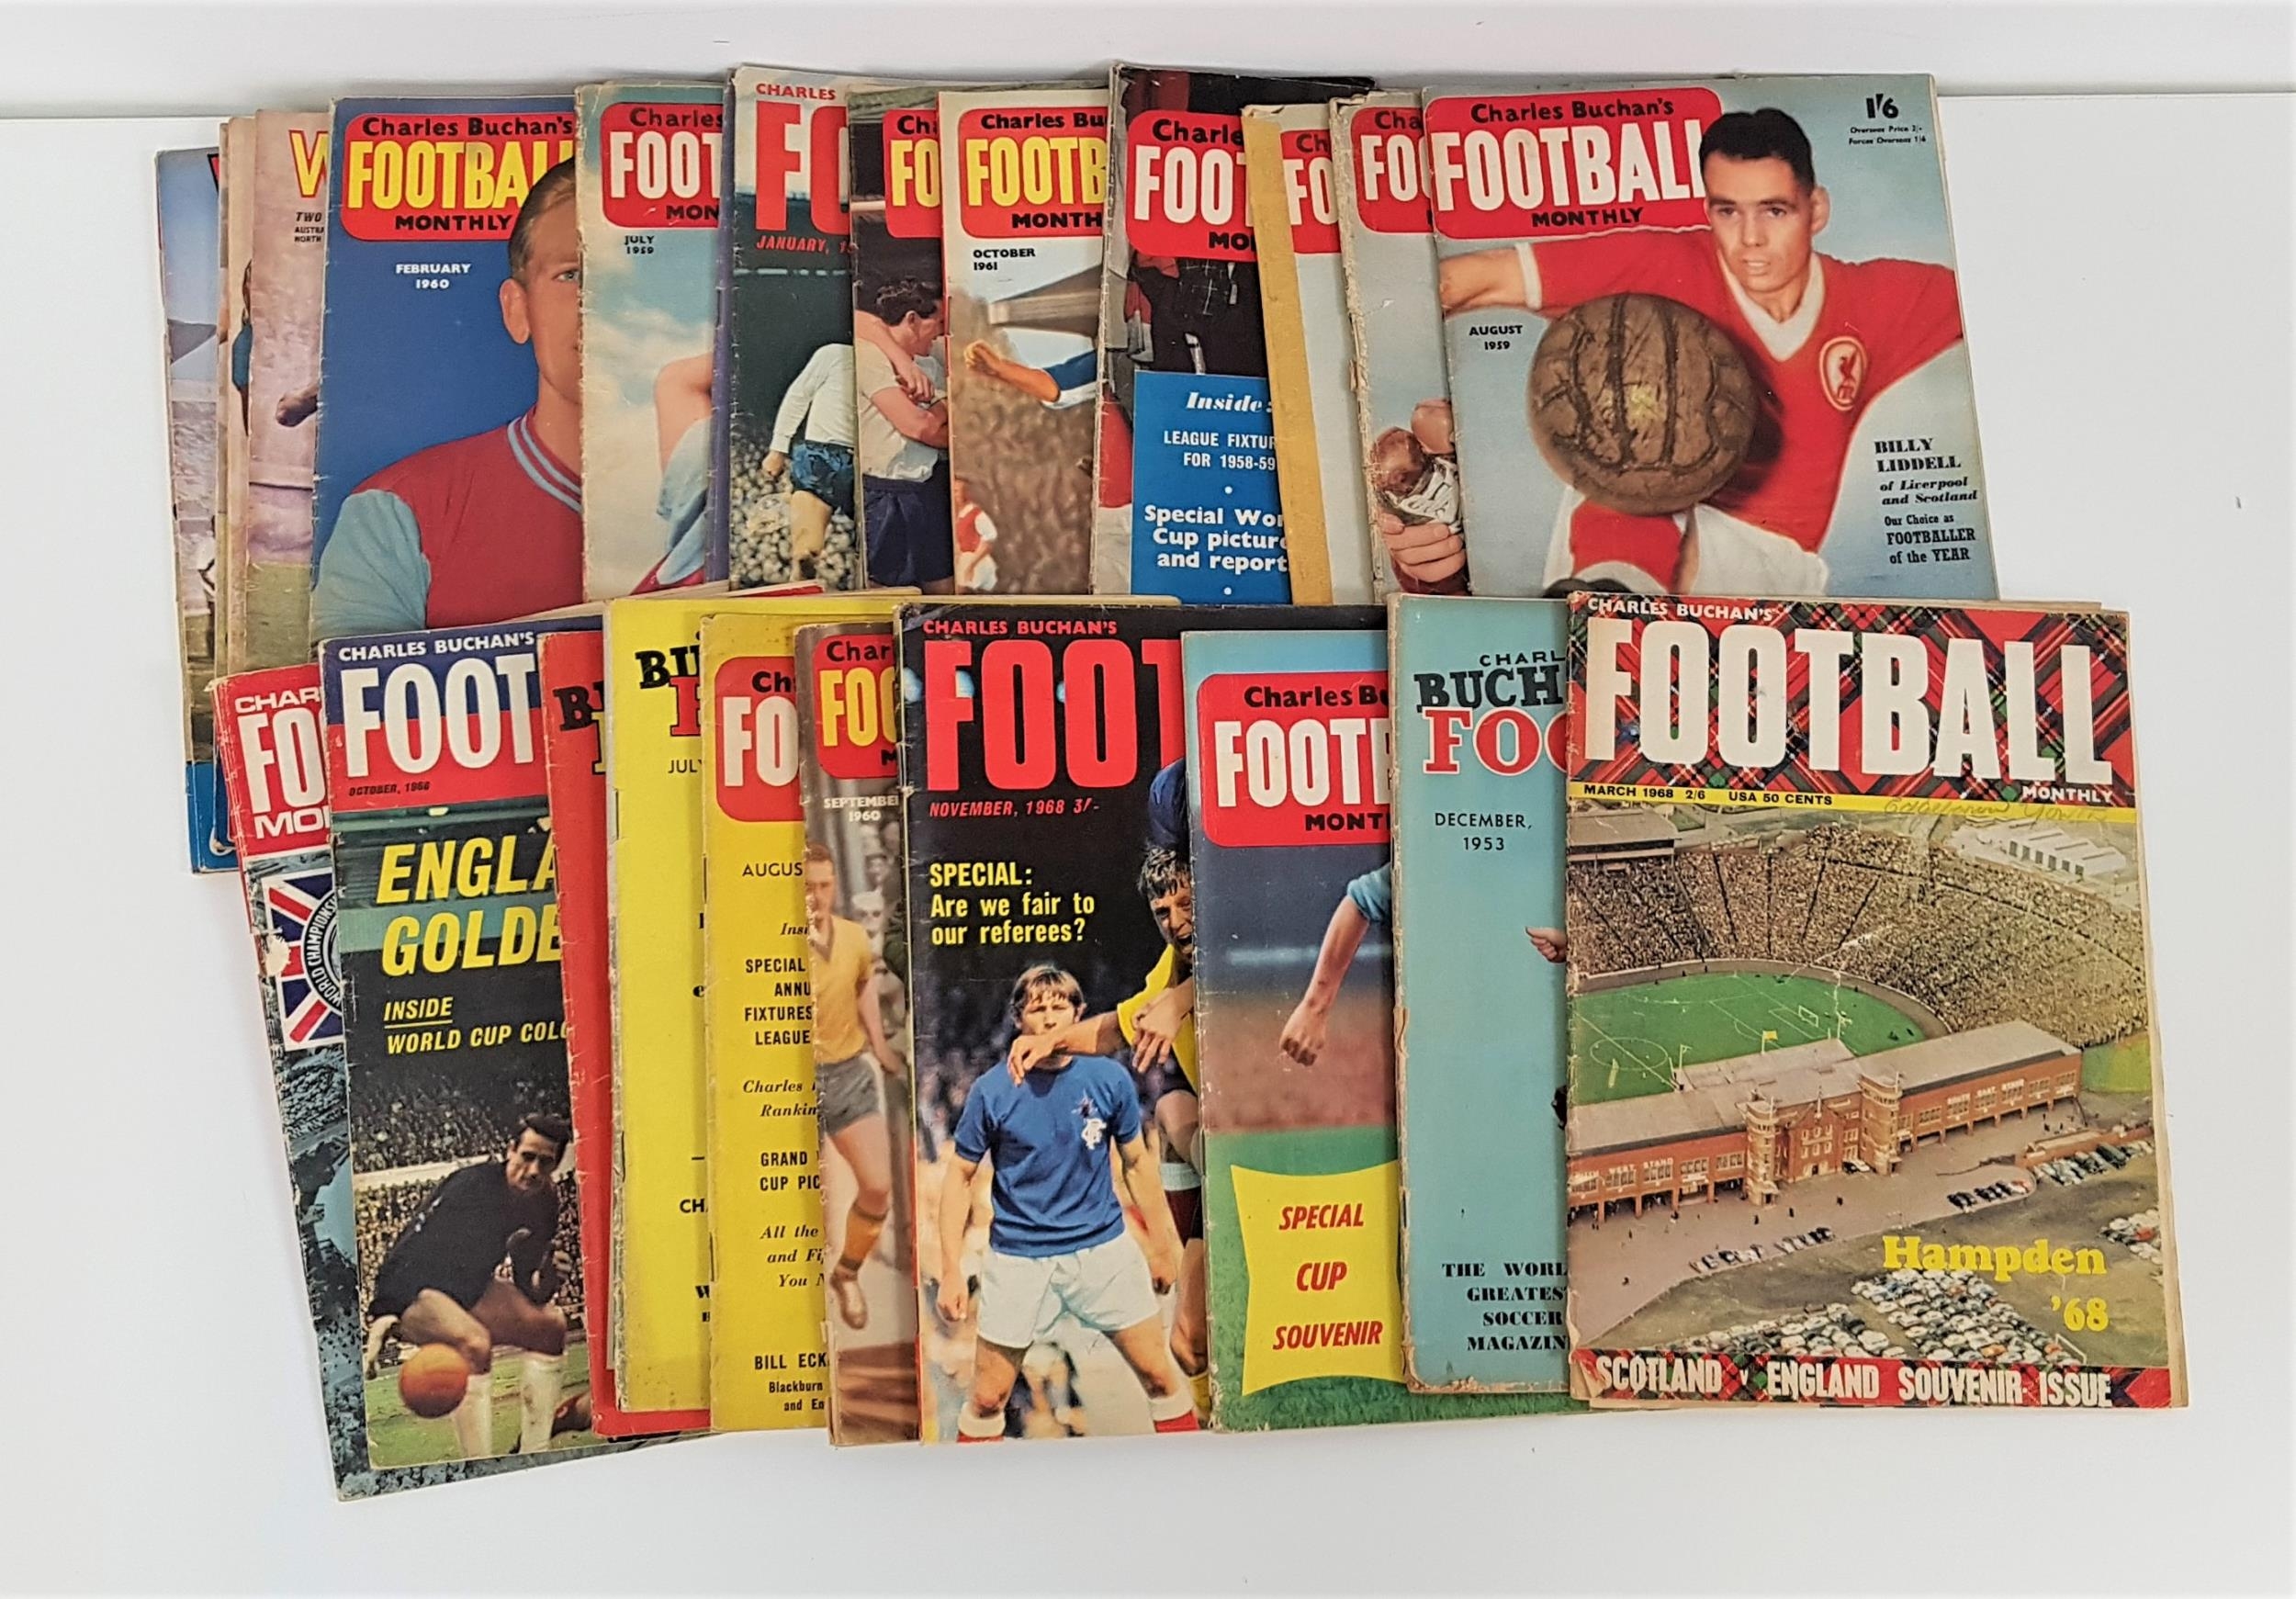 CHARLES BUCHANS FOOTBALL MONTHLY from the 1950s and 1960s, together with World Soccer magazines from